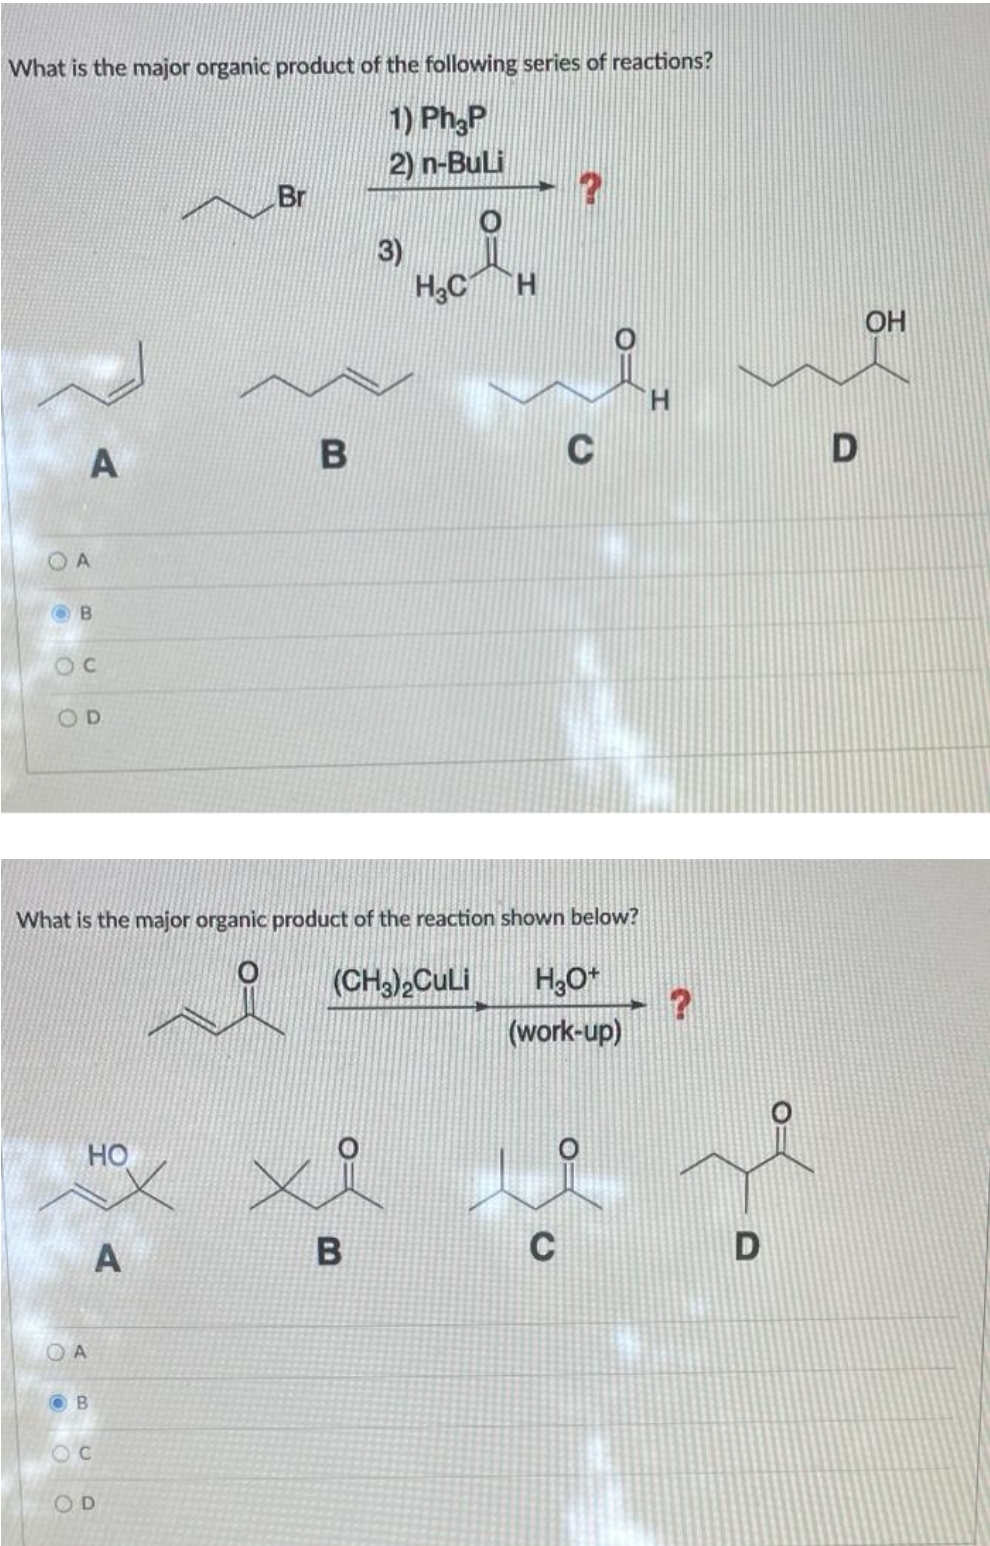 What is the major organic product of the following series of reactions?
1) Ph3P
2) n-BuLi
A
ОА
B
C
OD
HO
OA
OB
A
Br
What is the major organic product of the reaction shown below?
(CH3)₂CuLi H₂O+
(work-up)
OC
OD
B
3)
B
H₂C H
?
C
H
?
OH